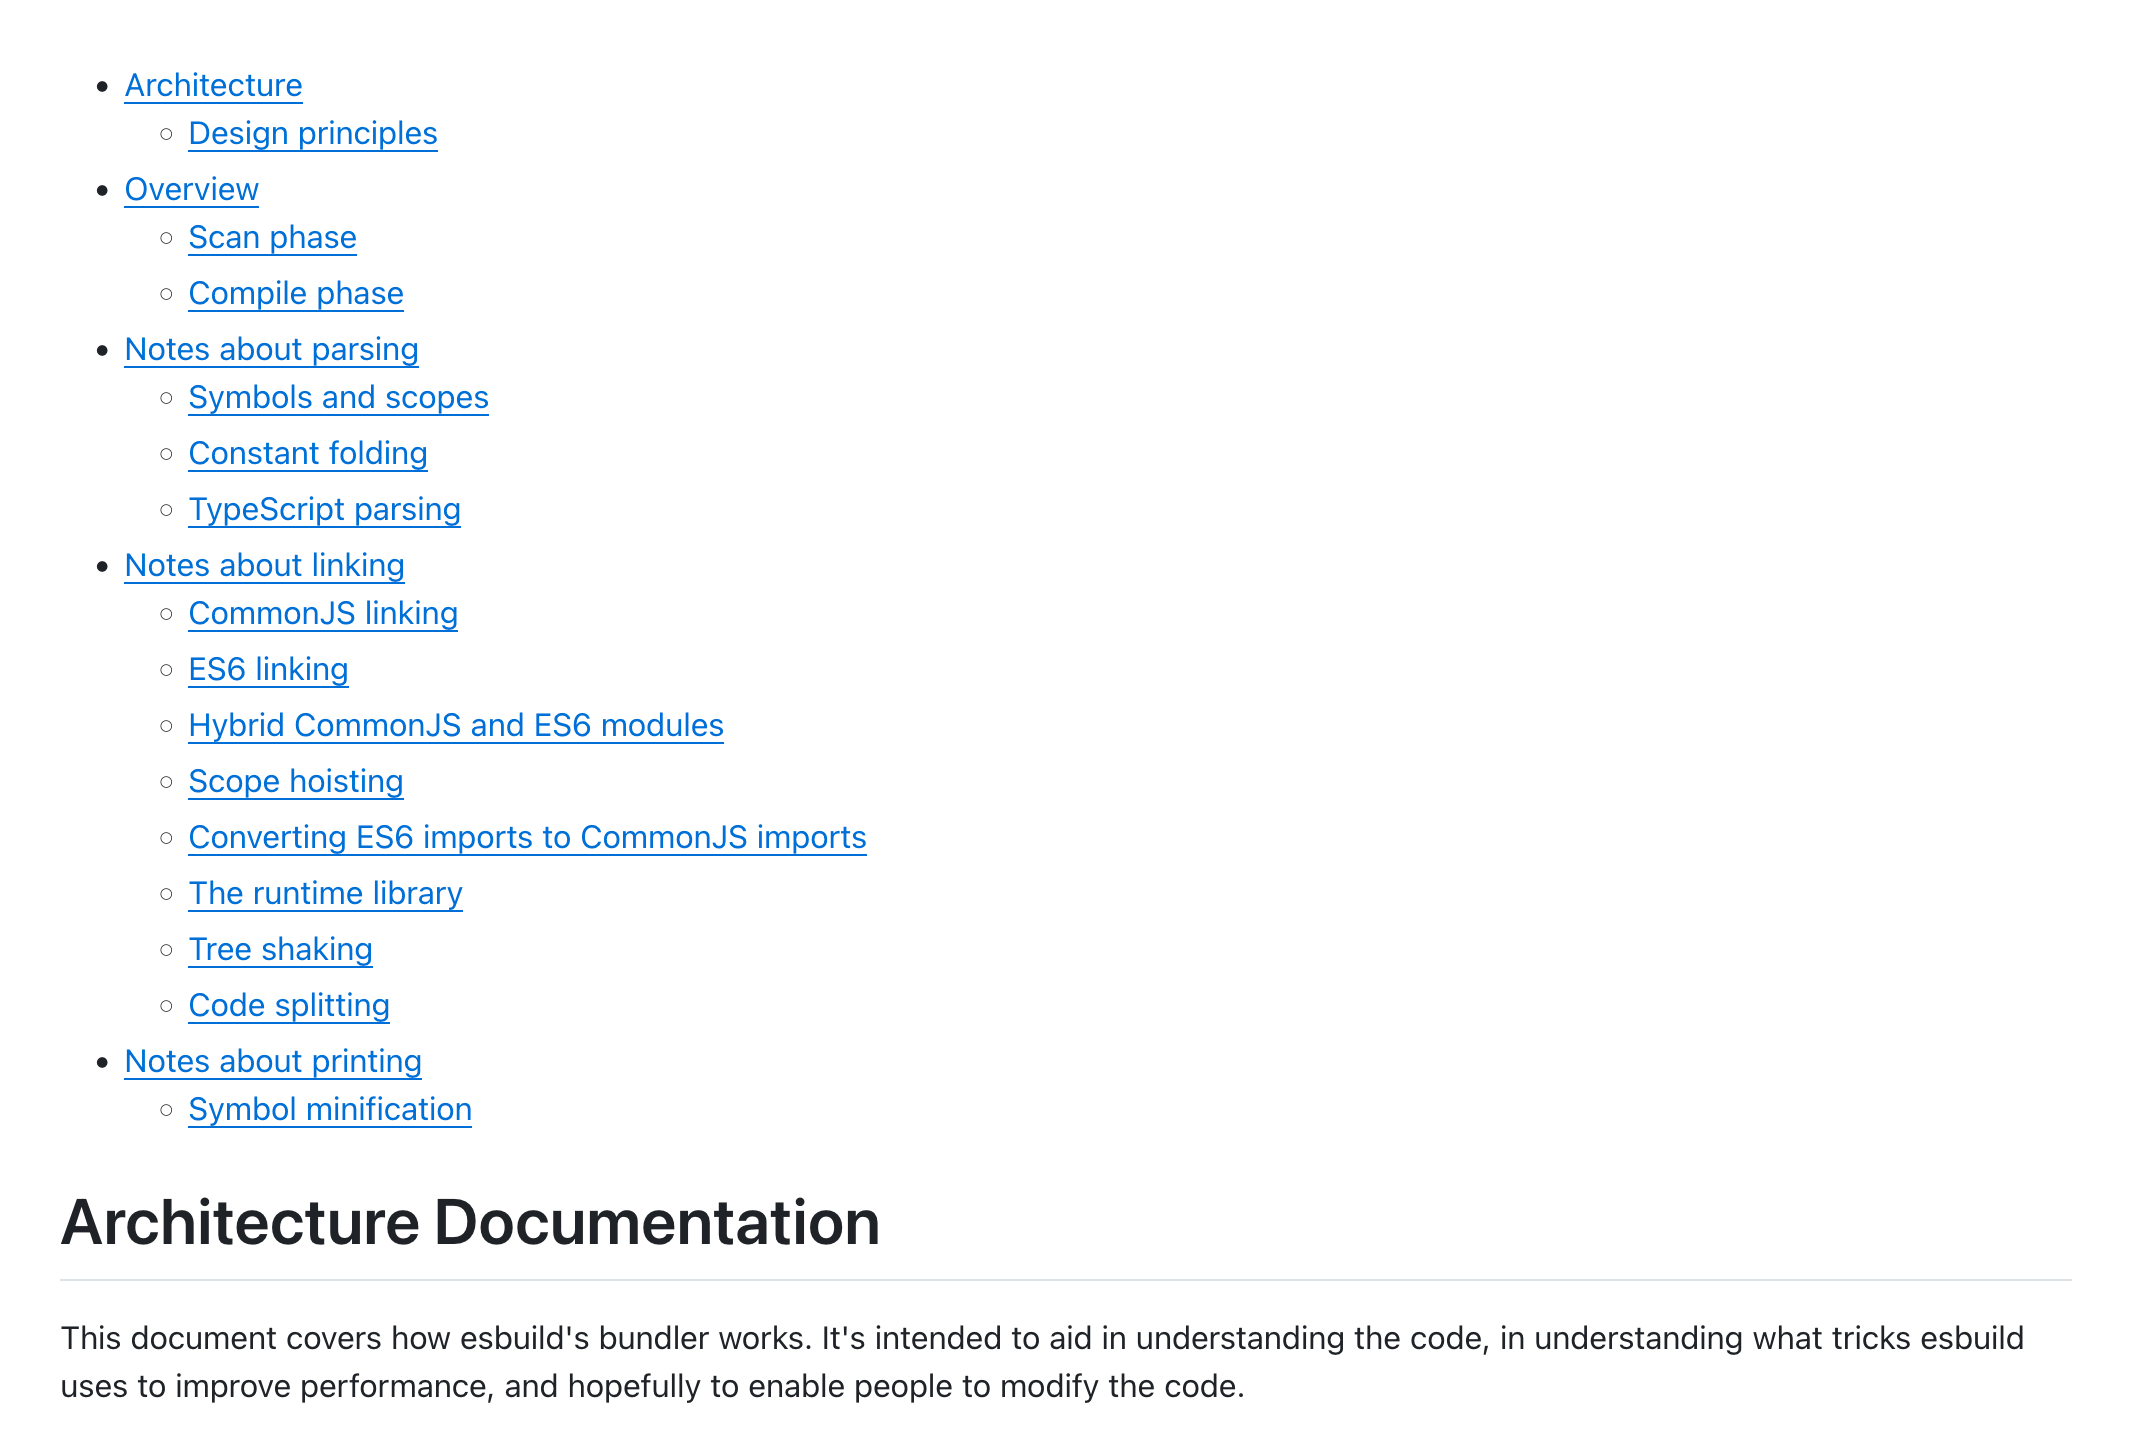 The table of contents and introductory paragraph of the esbuild architecture documentation.